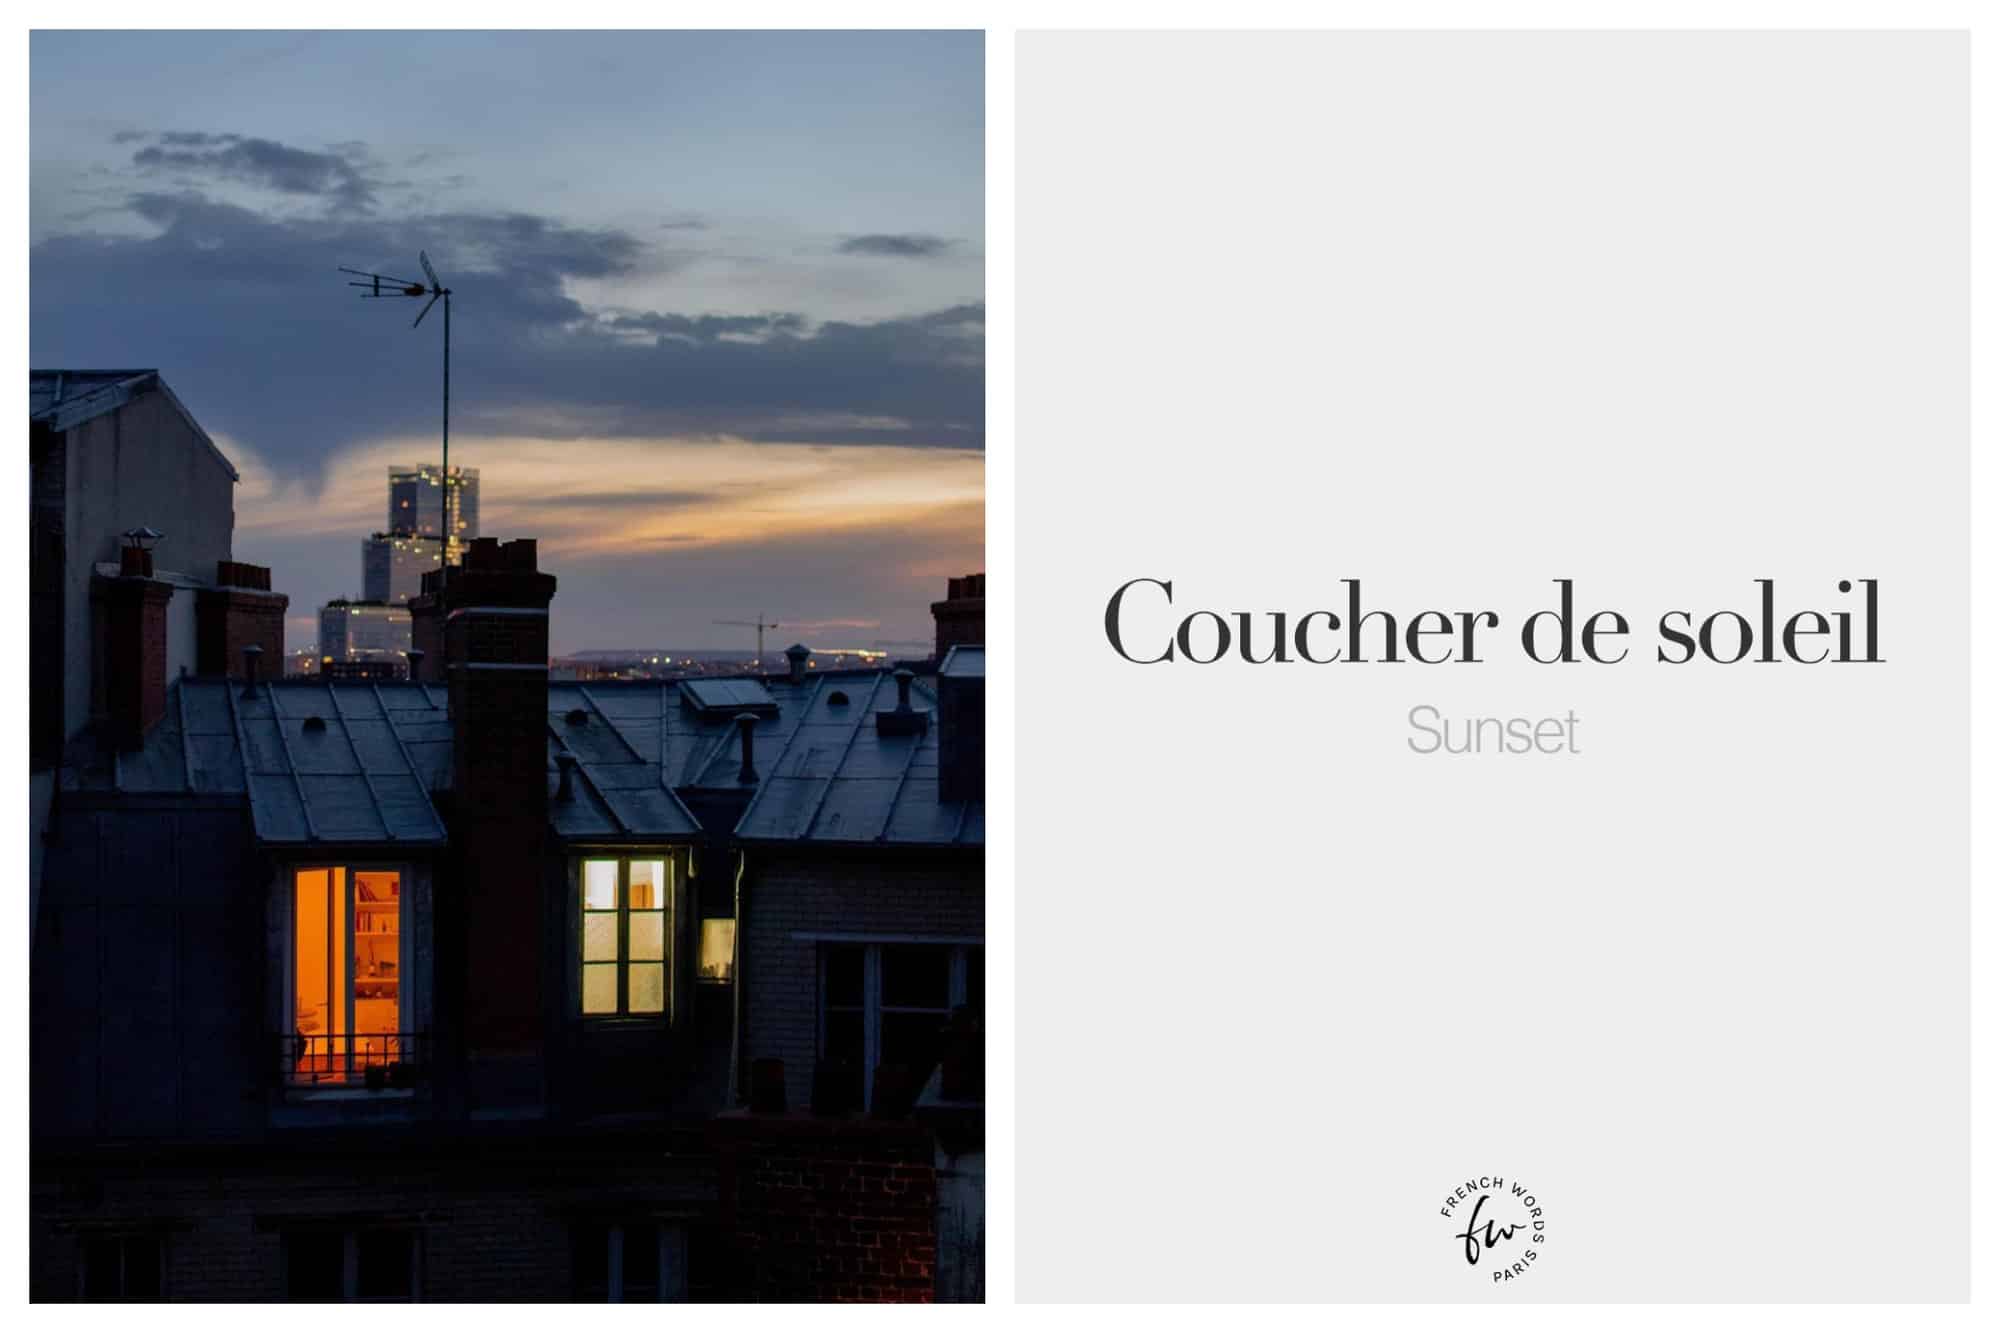 left: a picture of a sunset in Paris, with Clichy in the background and a Parisian rooftop in the foreground. Right:  text of both english and french: coucher de soleil / sunset.  